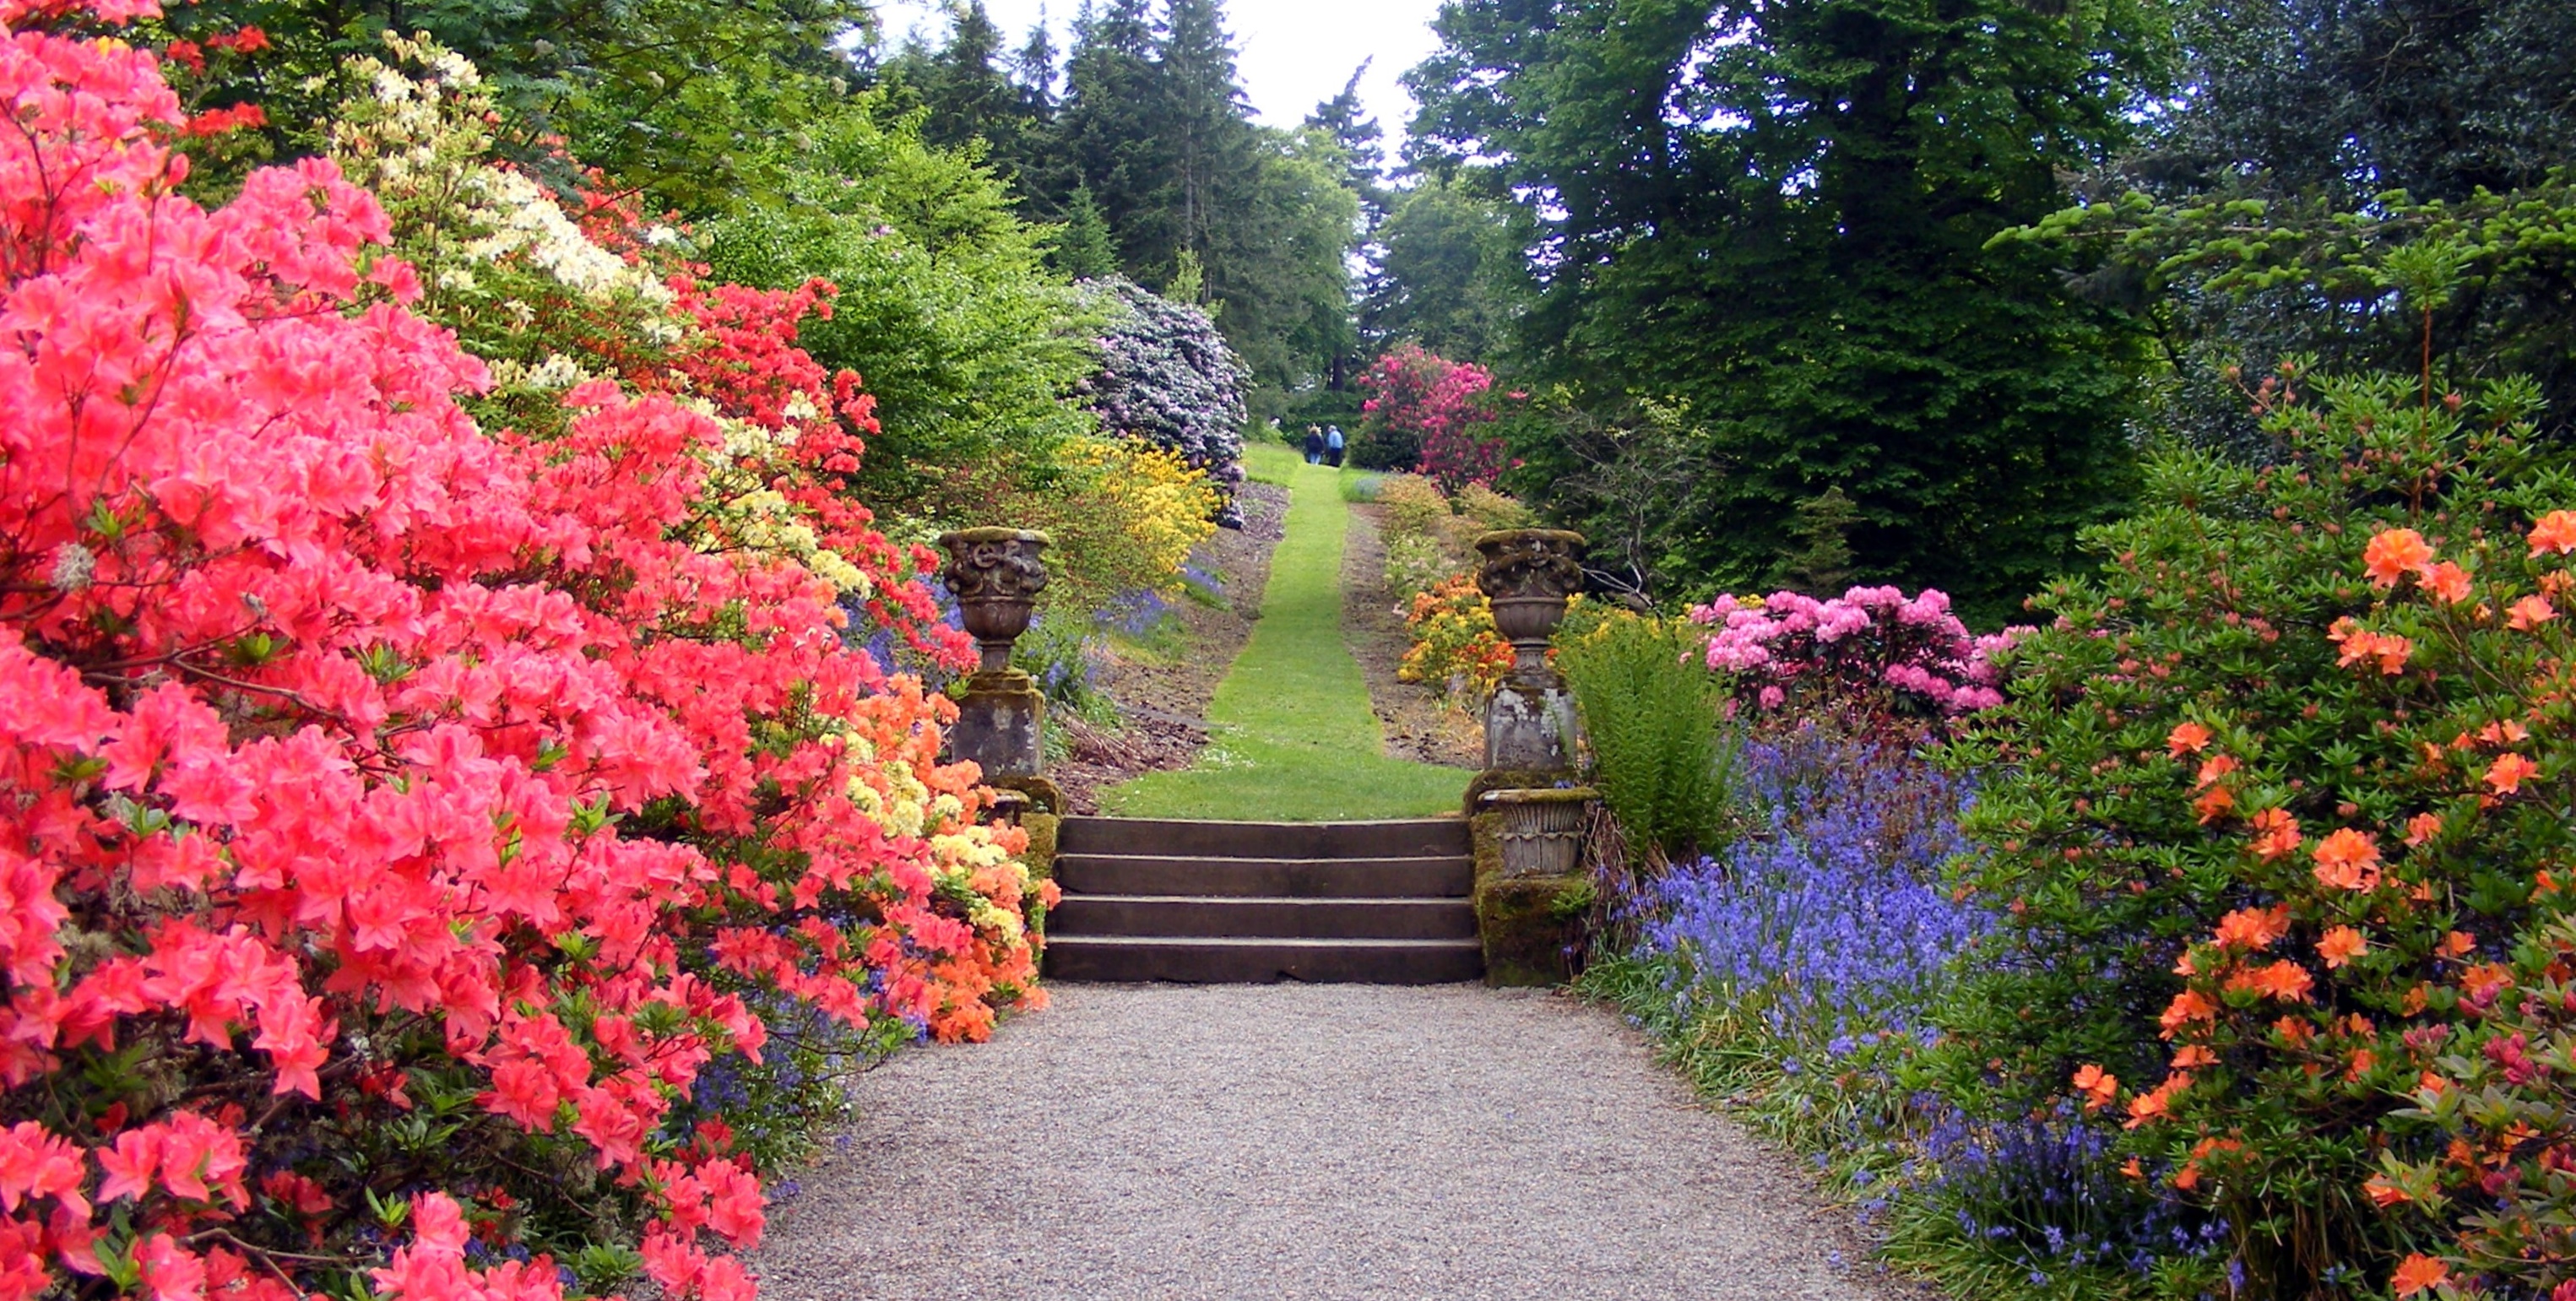 Christian Prayer Ministry by Heavens Garden in Corvallis, OR USA